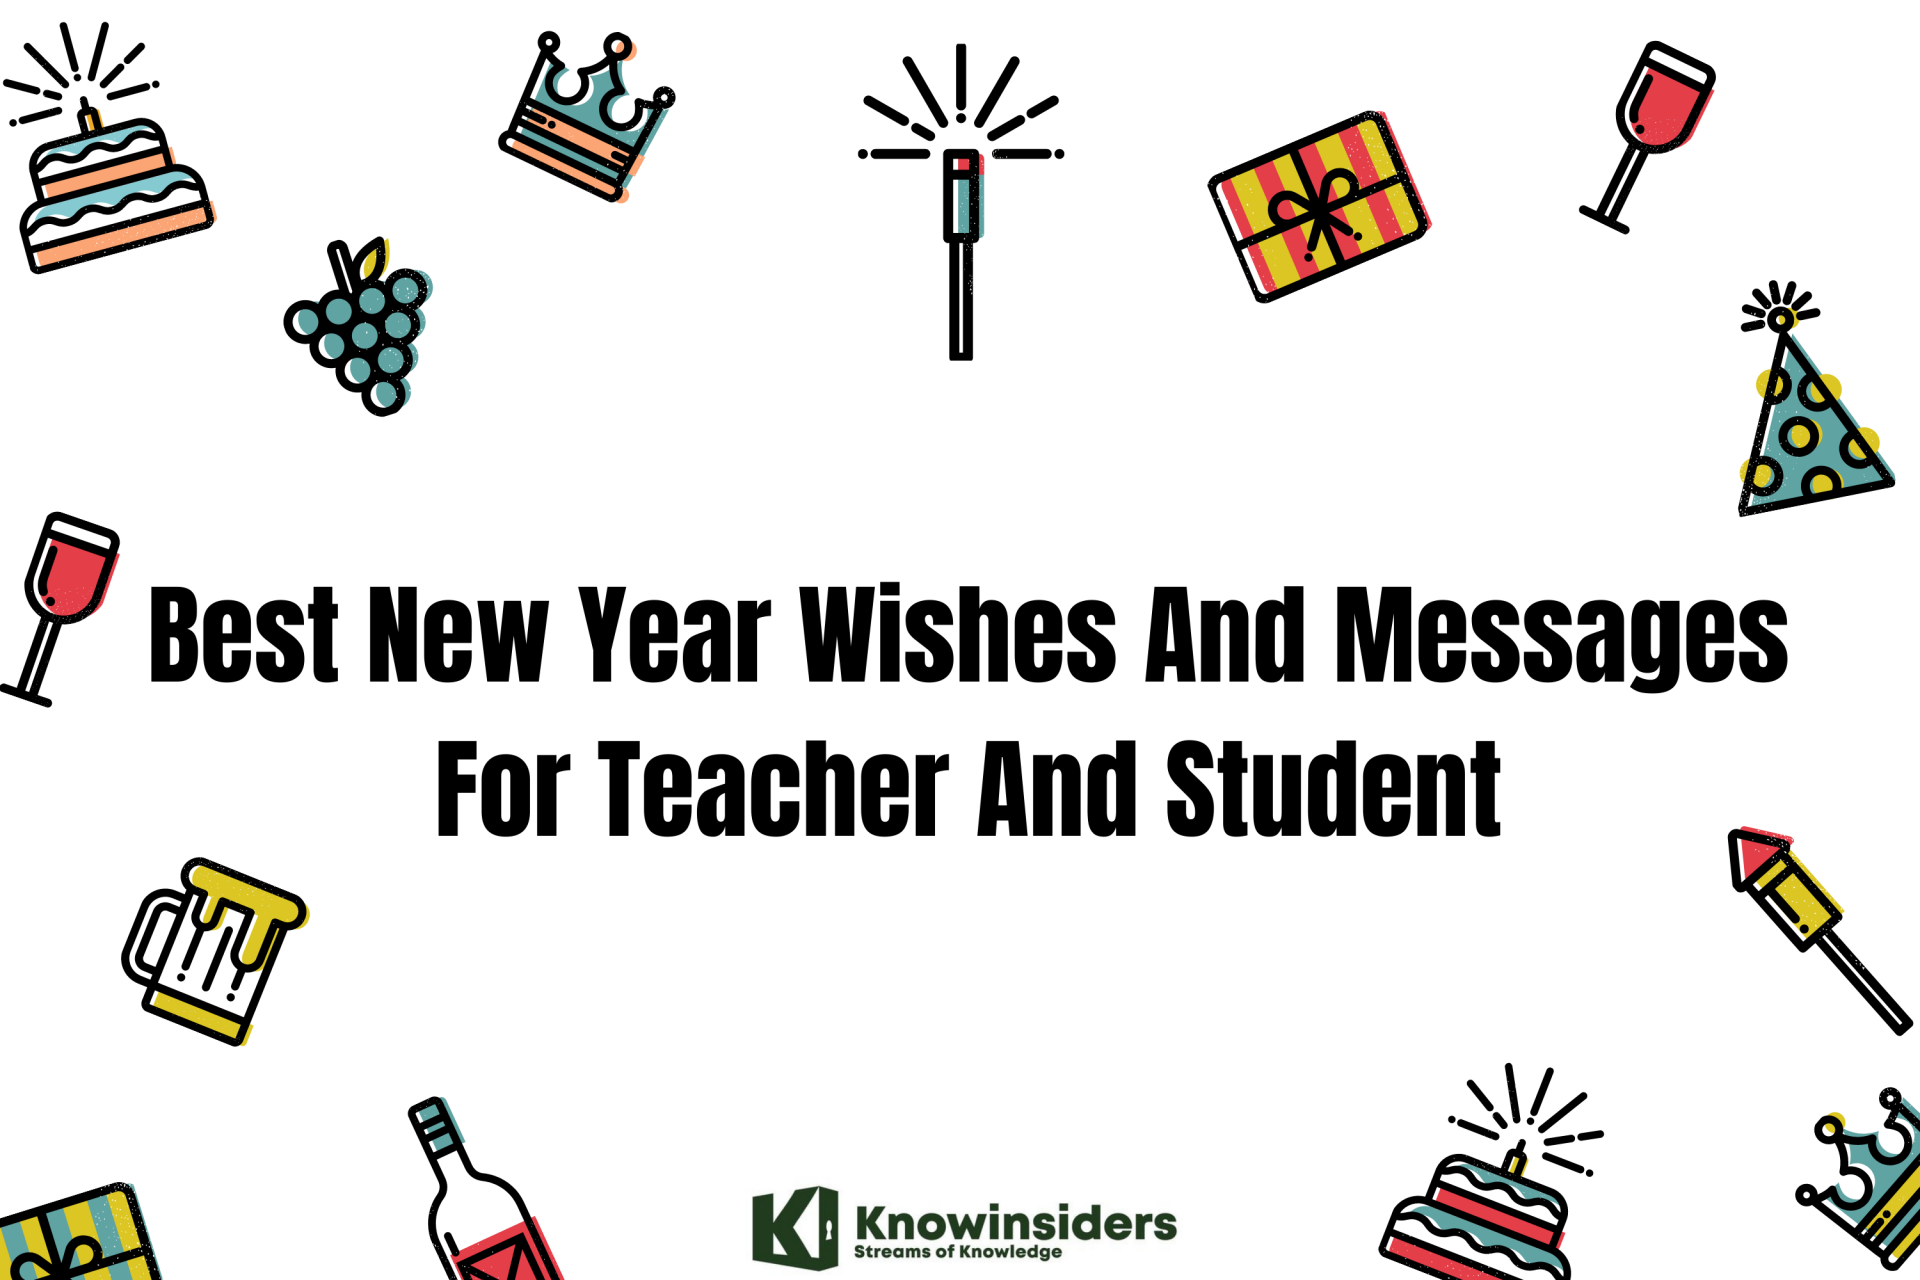 Best New Year Wishes And Messages For Teacher And Student